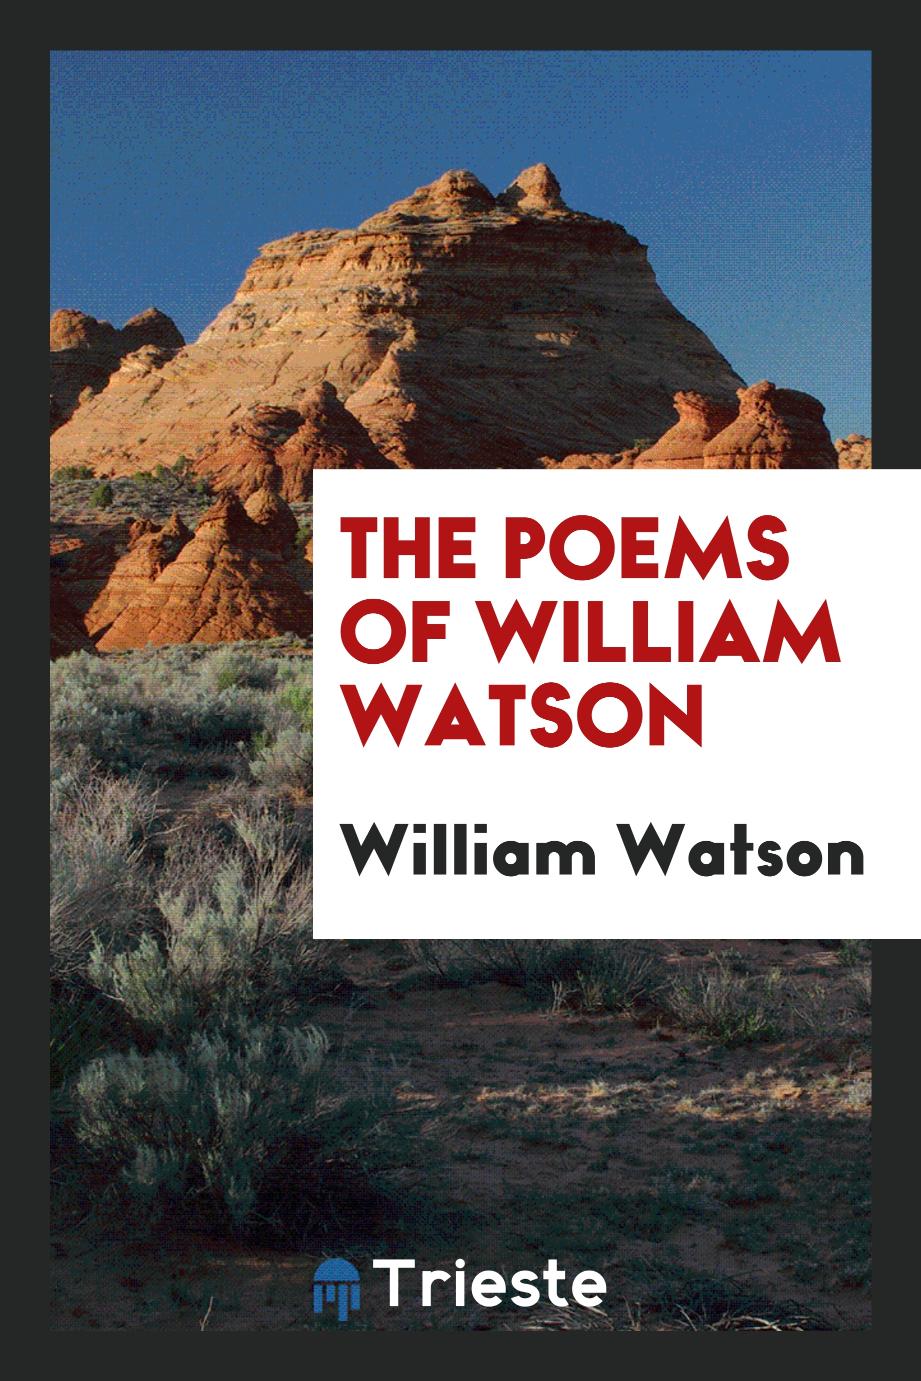 The poems of William Watson